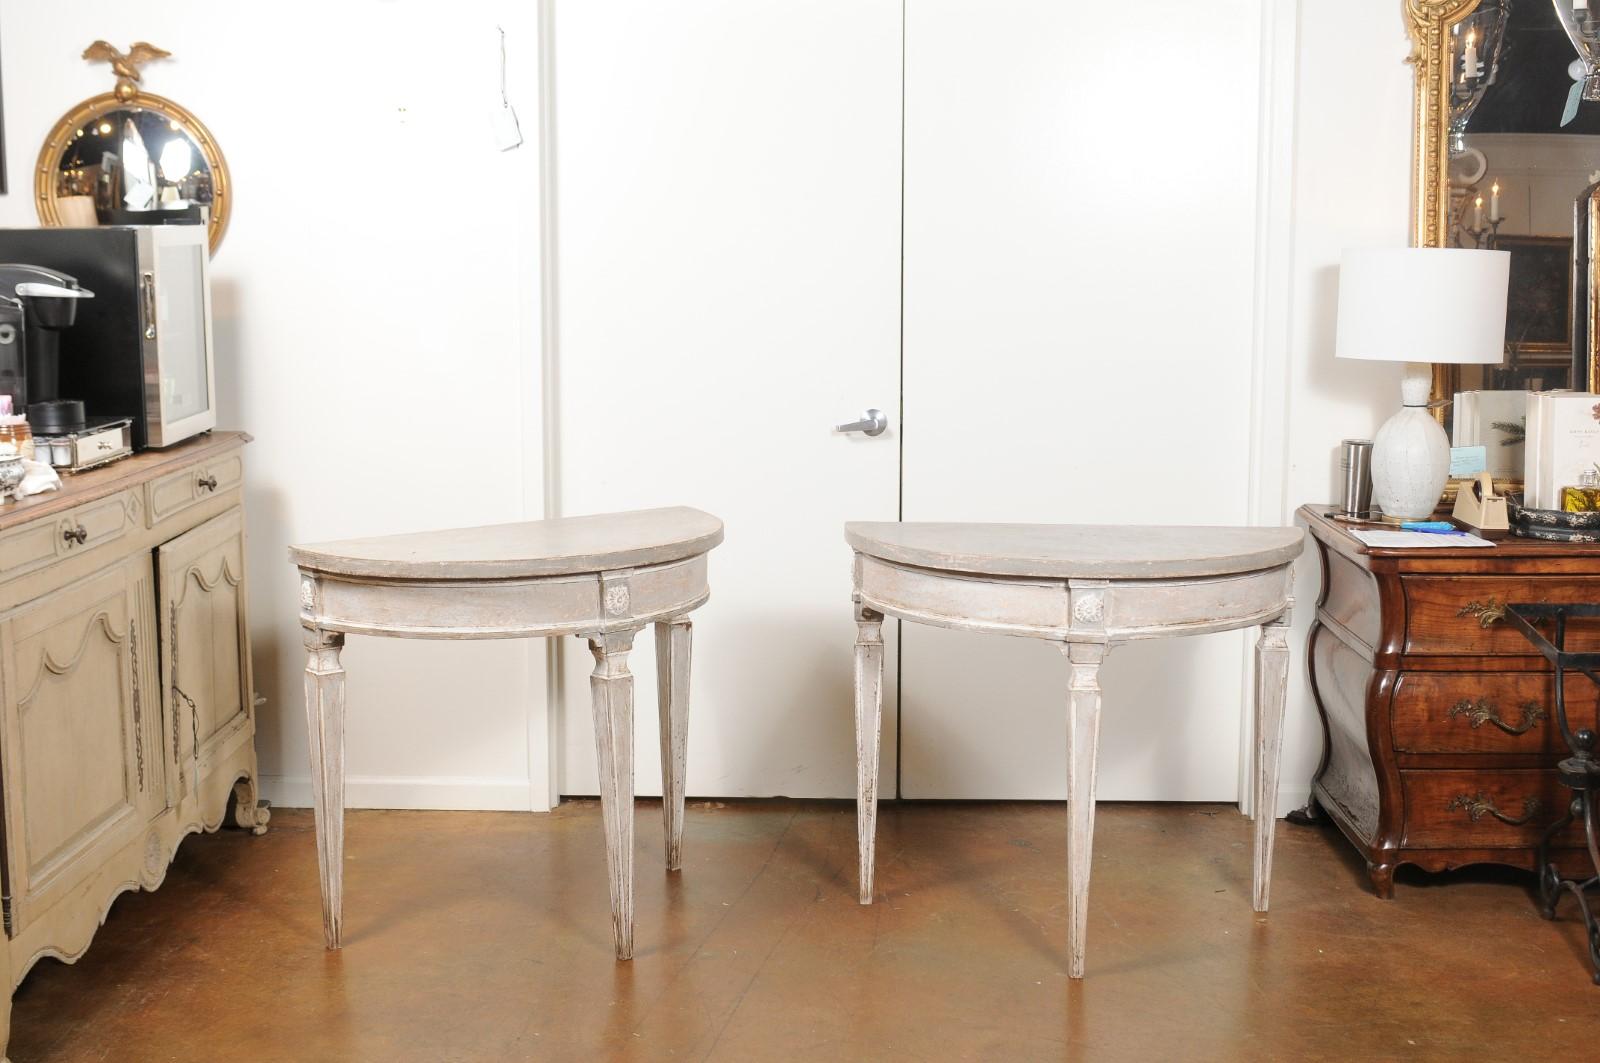 Pair of Italian 19th Century Florentine Demilune Tables Painted in Soft Grey (Neoklassisch)